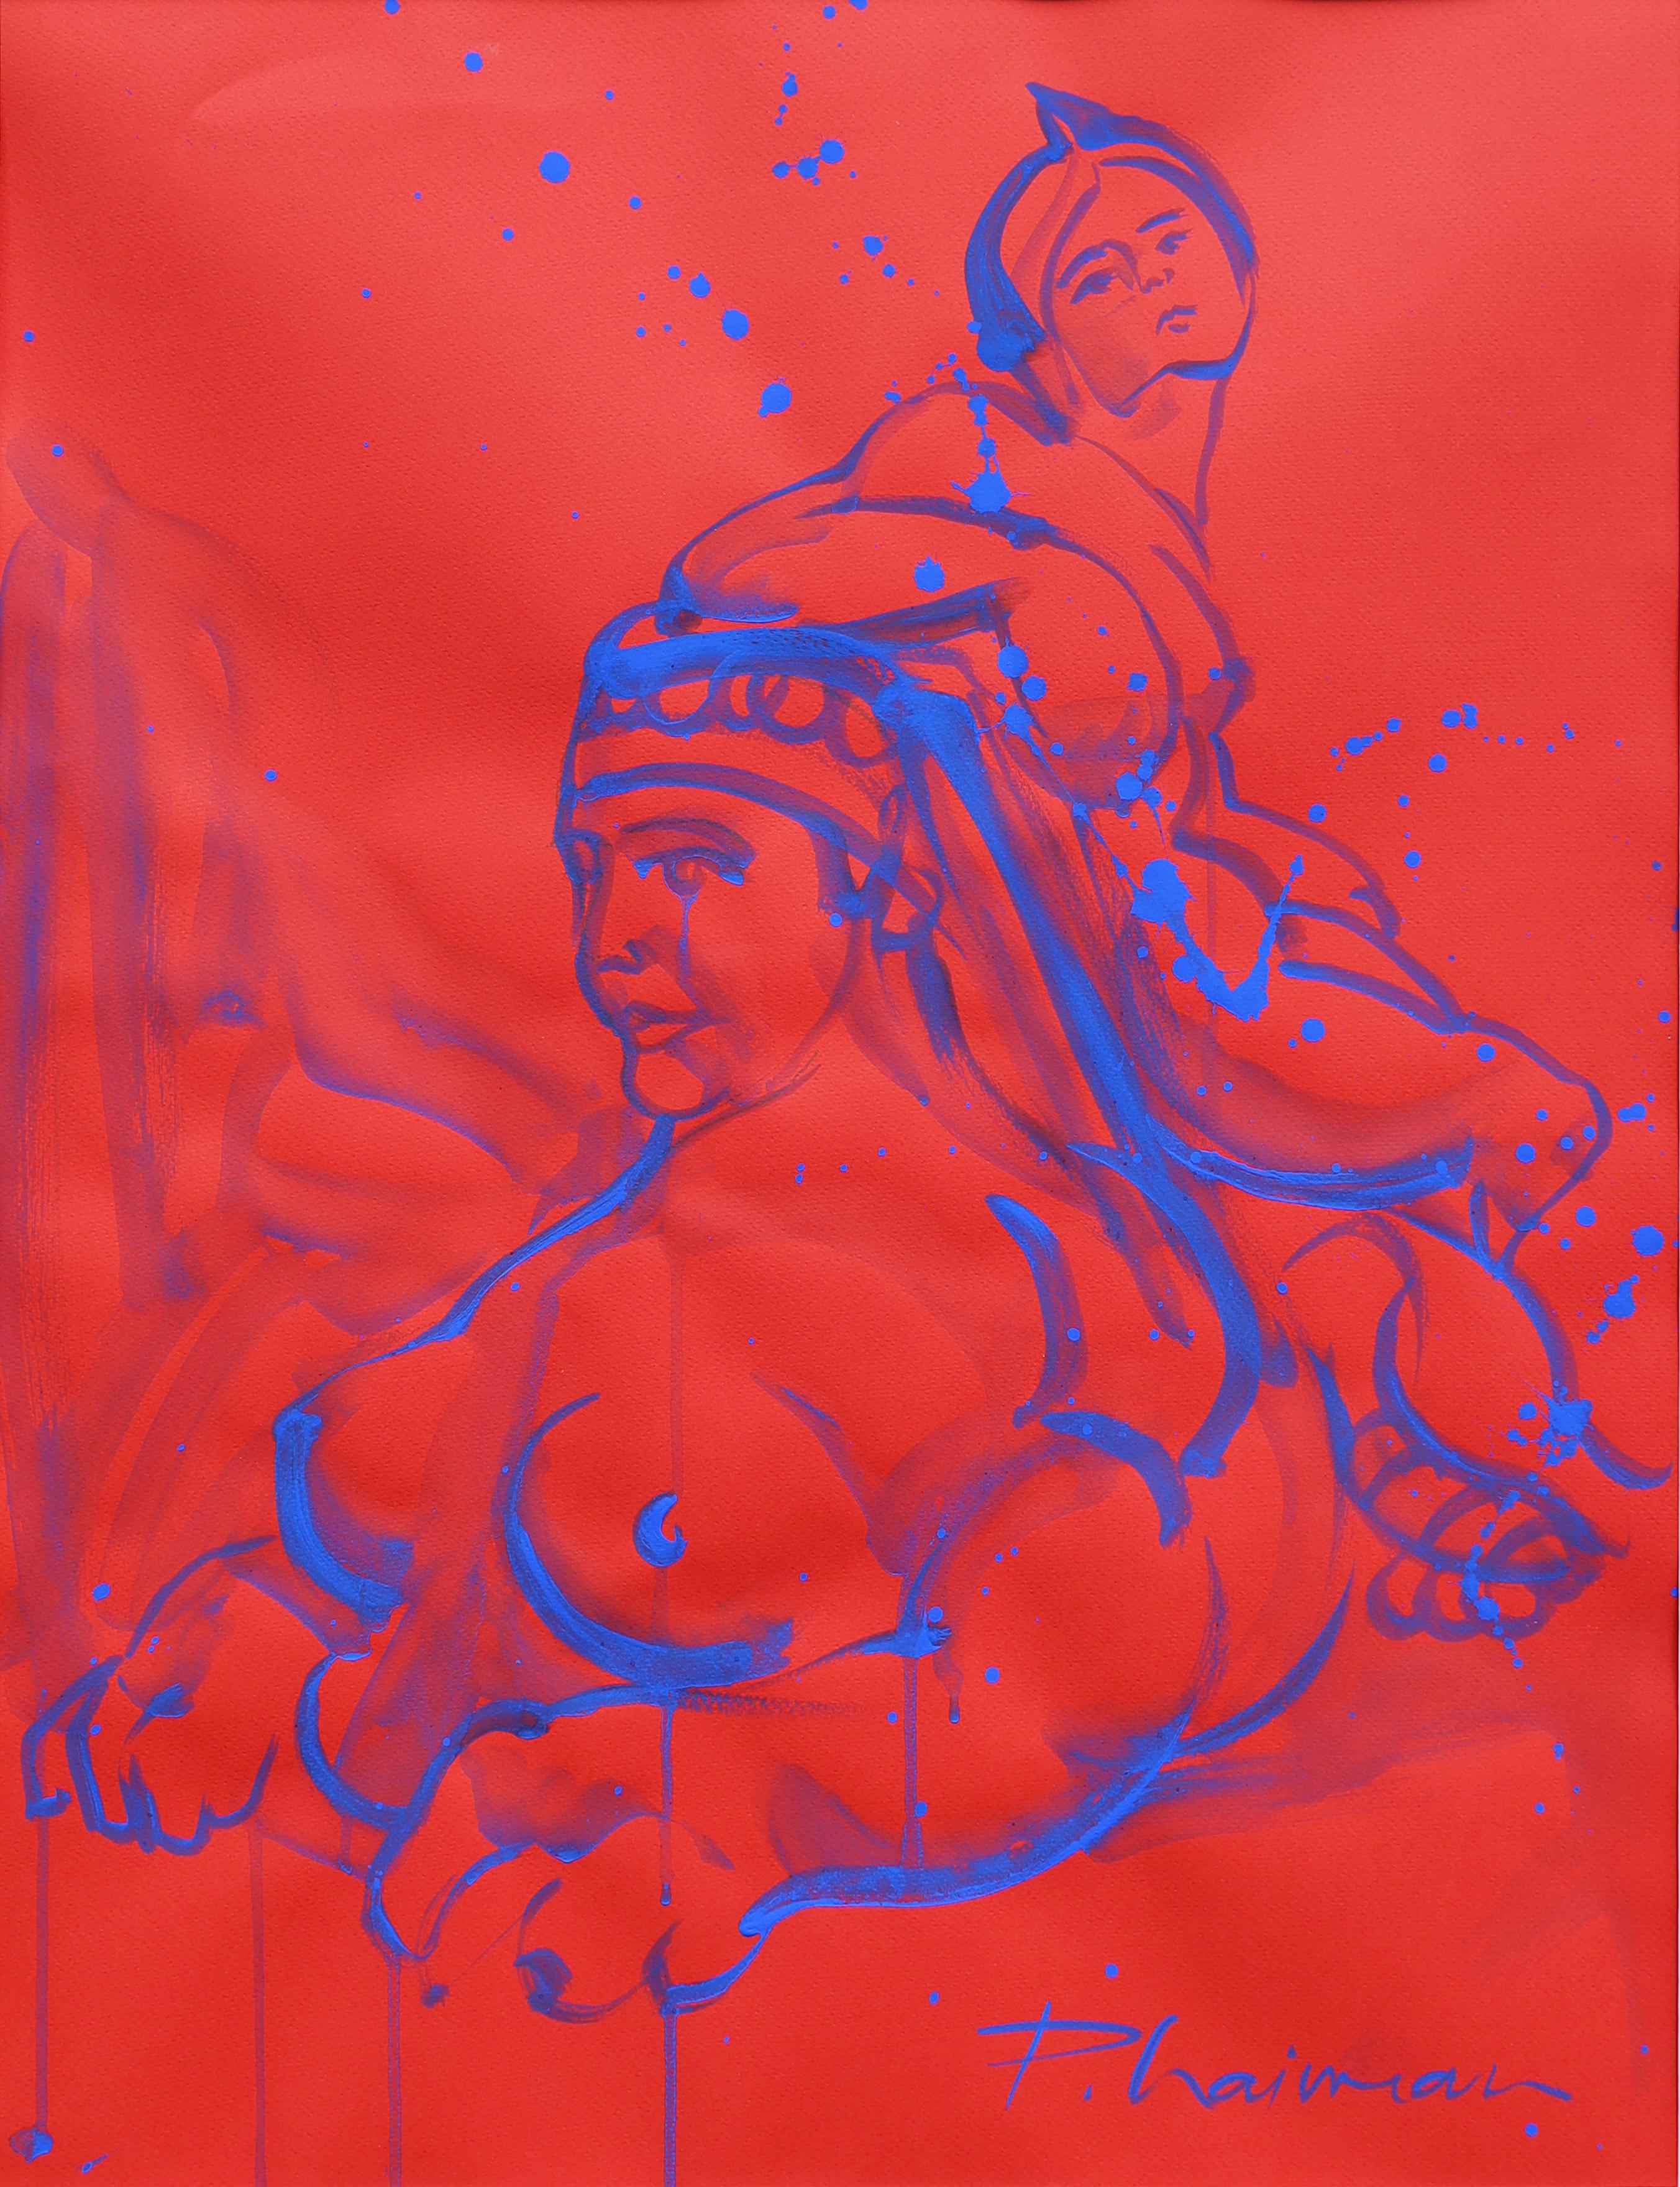 "The Sphinx"
The Sphinx a mythical creature with the head of a woman, the body of a lion, and the wings of an eagle.


Part of "Nude in Interior" series.
Original work on colored paper, with blue ultramarine tempera on red colored paper, inspired by